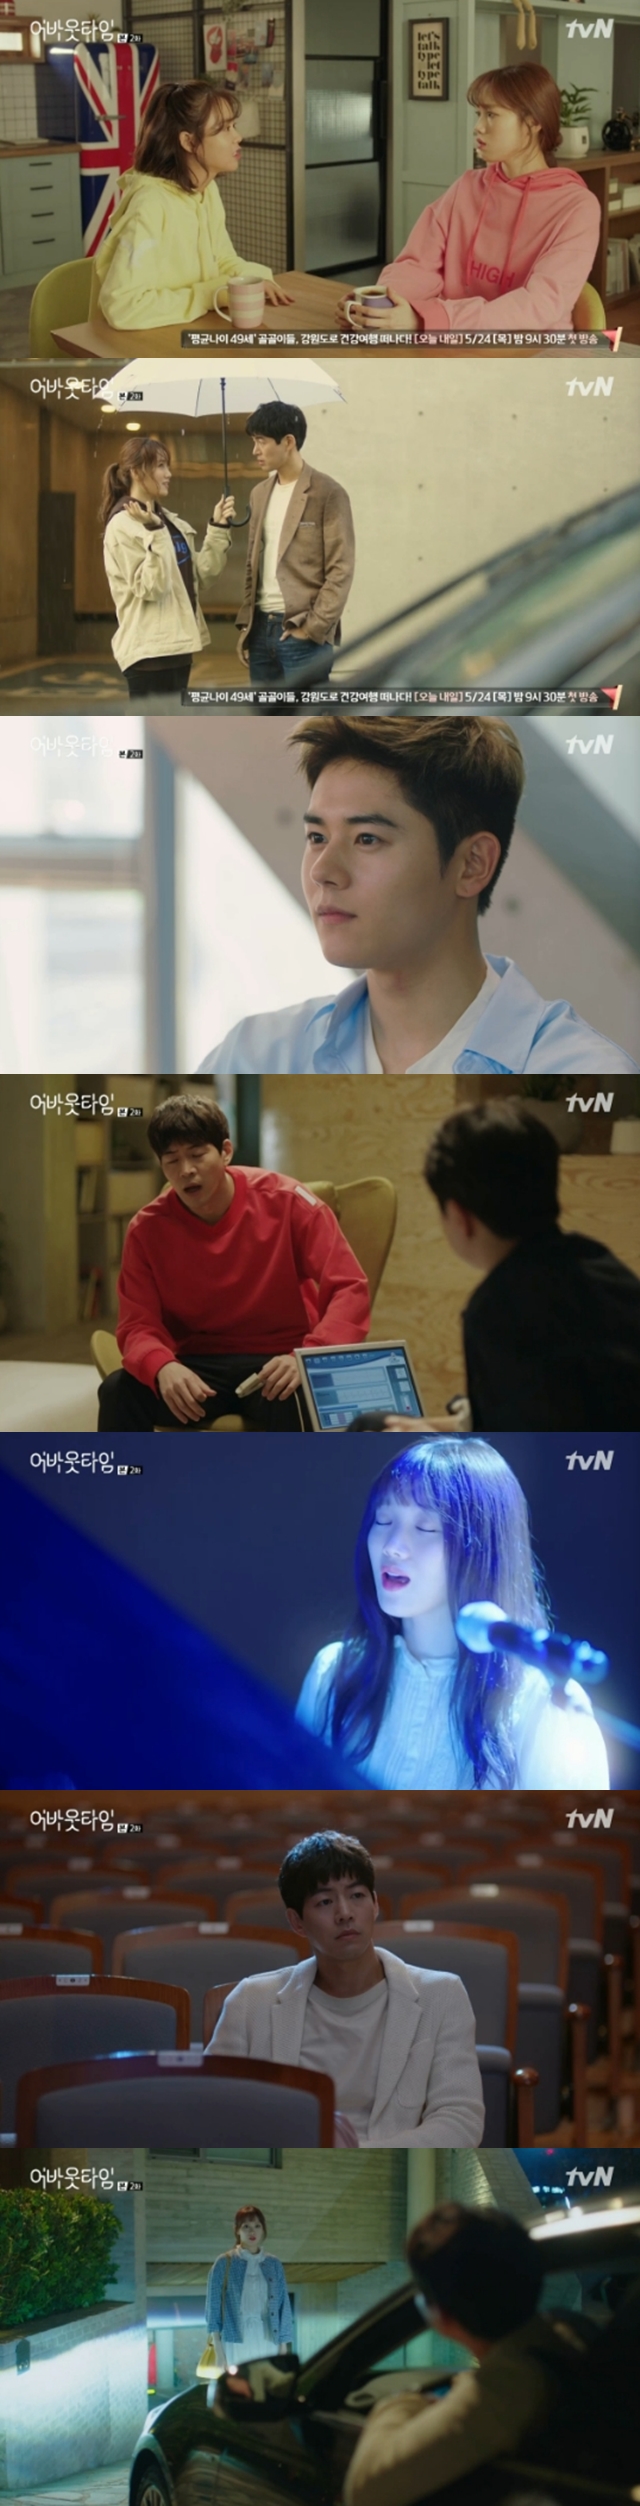 Lee Sung-kyung has entered into Operation Lee Sang-yoon Temptation.In the second episode of the new TVN Monday drama The Moment to Stop: About Time (playplayplay by Chu Hye-mi/director Kim Hyung-sik/production story TV) broadcast on May 22, it was revealed that the life span of Choi Jean Michaël Seri (Lee Sung-kyung) will increase by Lee Doha.When I was with this Doha, Choi Jean Michaël Seri, I knew that his life span clock stopped.His best friend Jeon Sung-hee (Han Seung-yeon) said, It is like a gift to Choi Mika.So I tried to Temptate this Doha by parodying the movie Jean Michaël Seri, Temption of the Wolf, and the eraser in your head.But IDoha has been rebuffed.Was Choi Michael Seriras operation a success?IDoha continued to think of Choi Jean Michaël Seri, and when he saw the futile thing, he called his doctor, Park Sung-bin (Tae In-ho).At this time, Doha attracted attention only when he talked about Choi Jean Michaël Seri, his heart rate was fast.To get the investment of Jang Chiang (Woo Hyo-kwang), Lee Doha had to produce the first production of the music director Cho Jae-yu (Kim Dong-joon).I have never been able to make money for my music. Actor said he would make a staff.The production has not yet been confirmed. Doha went to see Cho Jae-yus musical audition.I applied to this audition, Jean Michaël Seri, who had heard that Doha might take charge of the musical production by Jeon Sung-hee.But in his turn, Cho left to answer the phone, and Doha was more virtuous than Choi Jean Michaël Seri singing.I feel like shes going to stop the time like this, like shes pounding my heart, and if I run into her without running away, I can prove everything.I saw that there was more Doha than the addition of Choi Jean Michaël Seri, and after the addition, I went to greet him, but I Doha ran away.Since then, he has been working on another operation, saying that he wants to go to the company of Doha, Choi Michael Seri, and work as a driver.Eventually he took a taxi to his house and asked, Would you like to date me if you dont like the driver? When I Doha asked, Do you like me?kim ye-eun